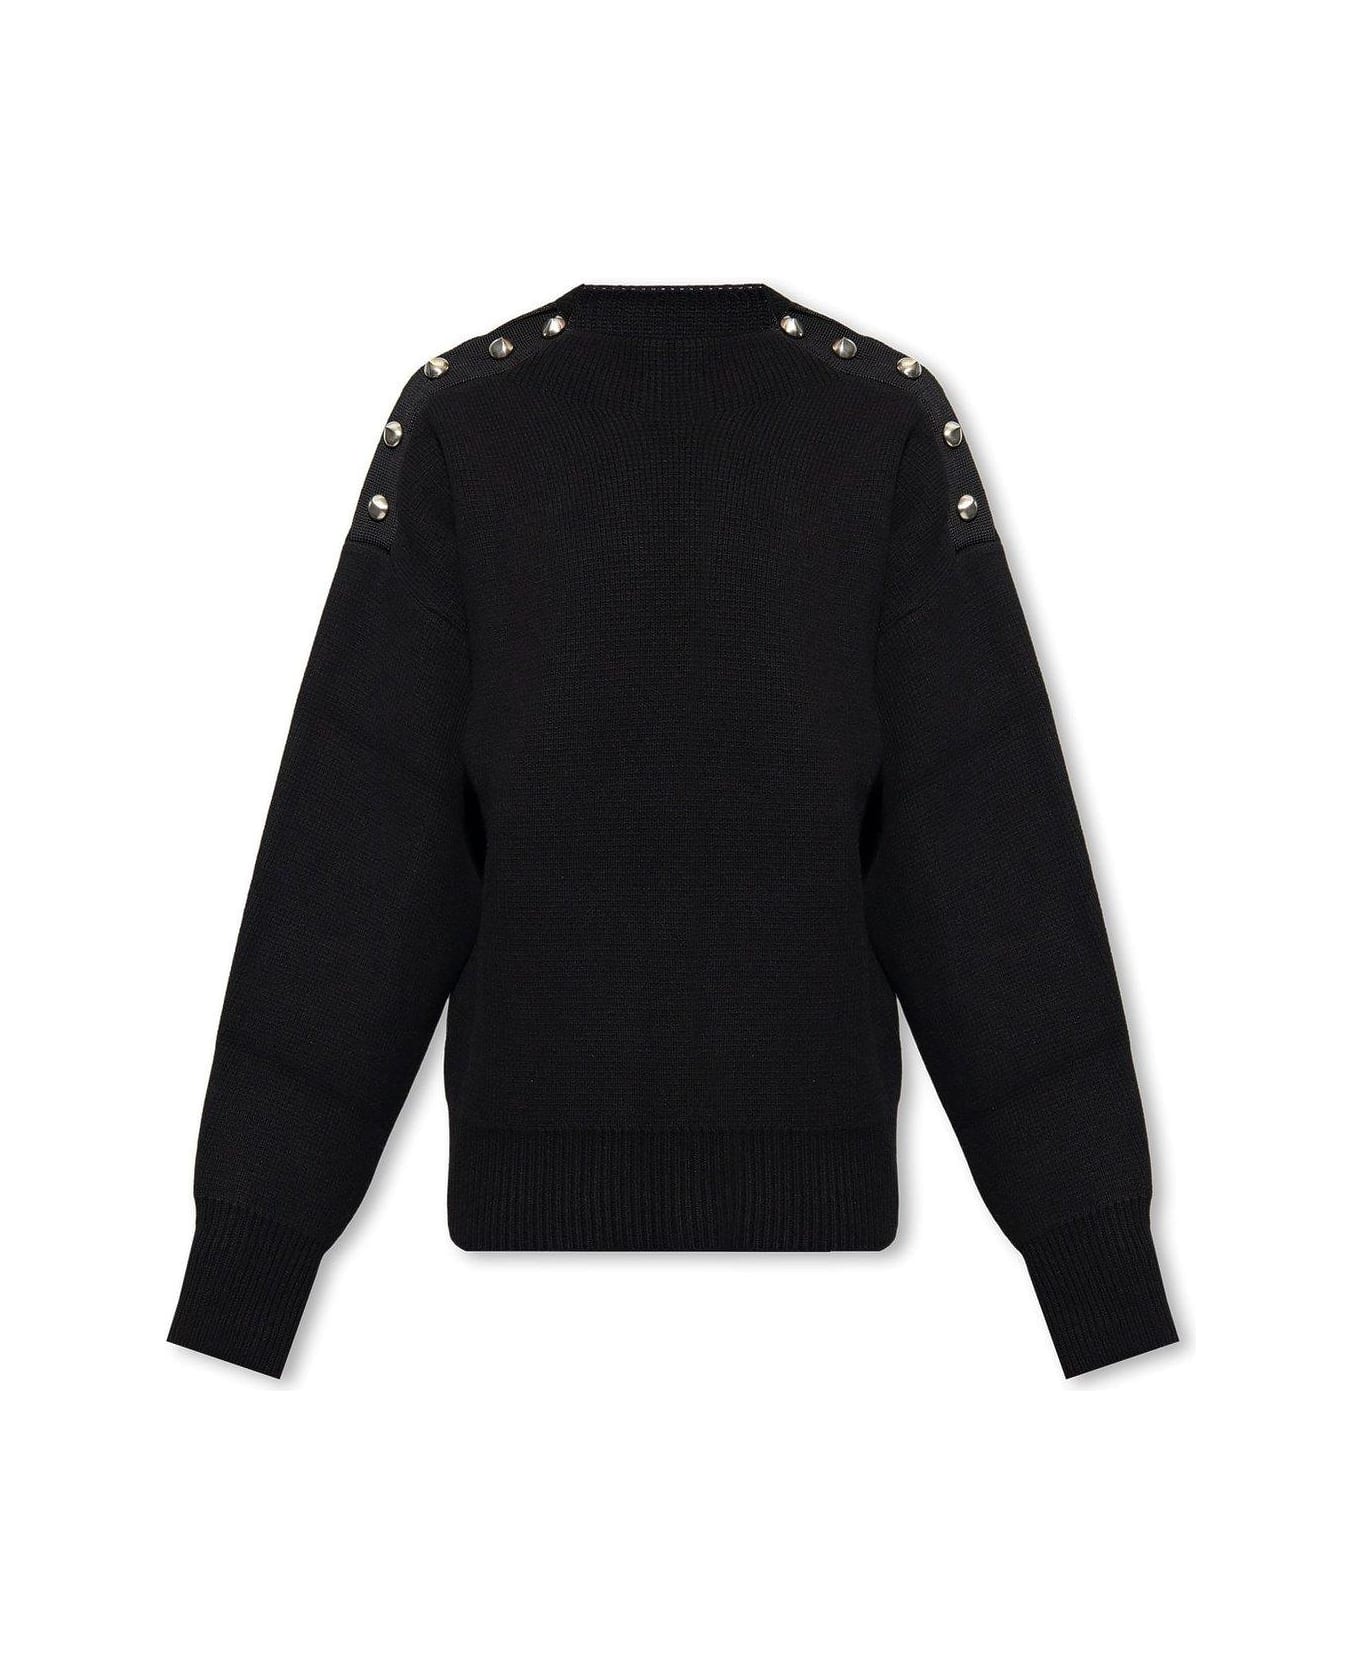 Ferragamo Button Detailed Knitted Sweater - BLACK